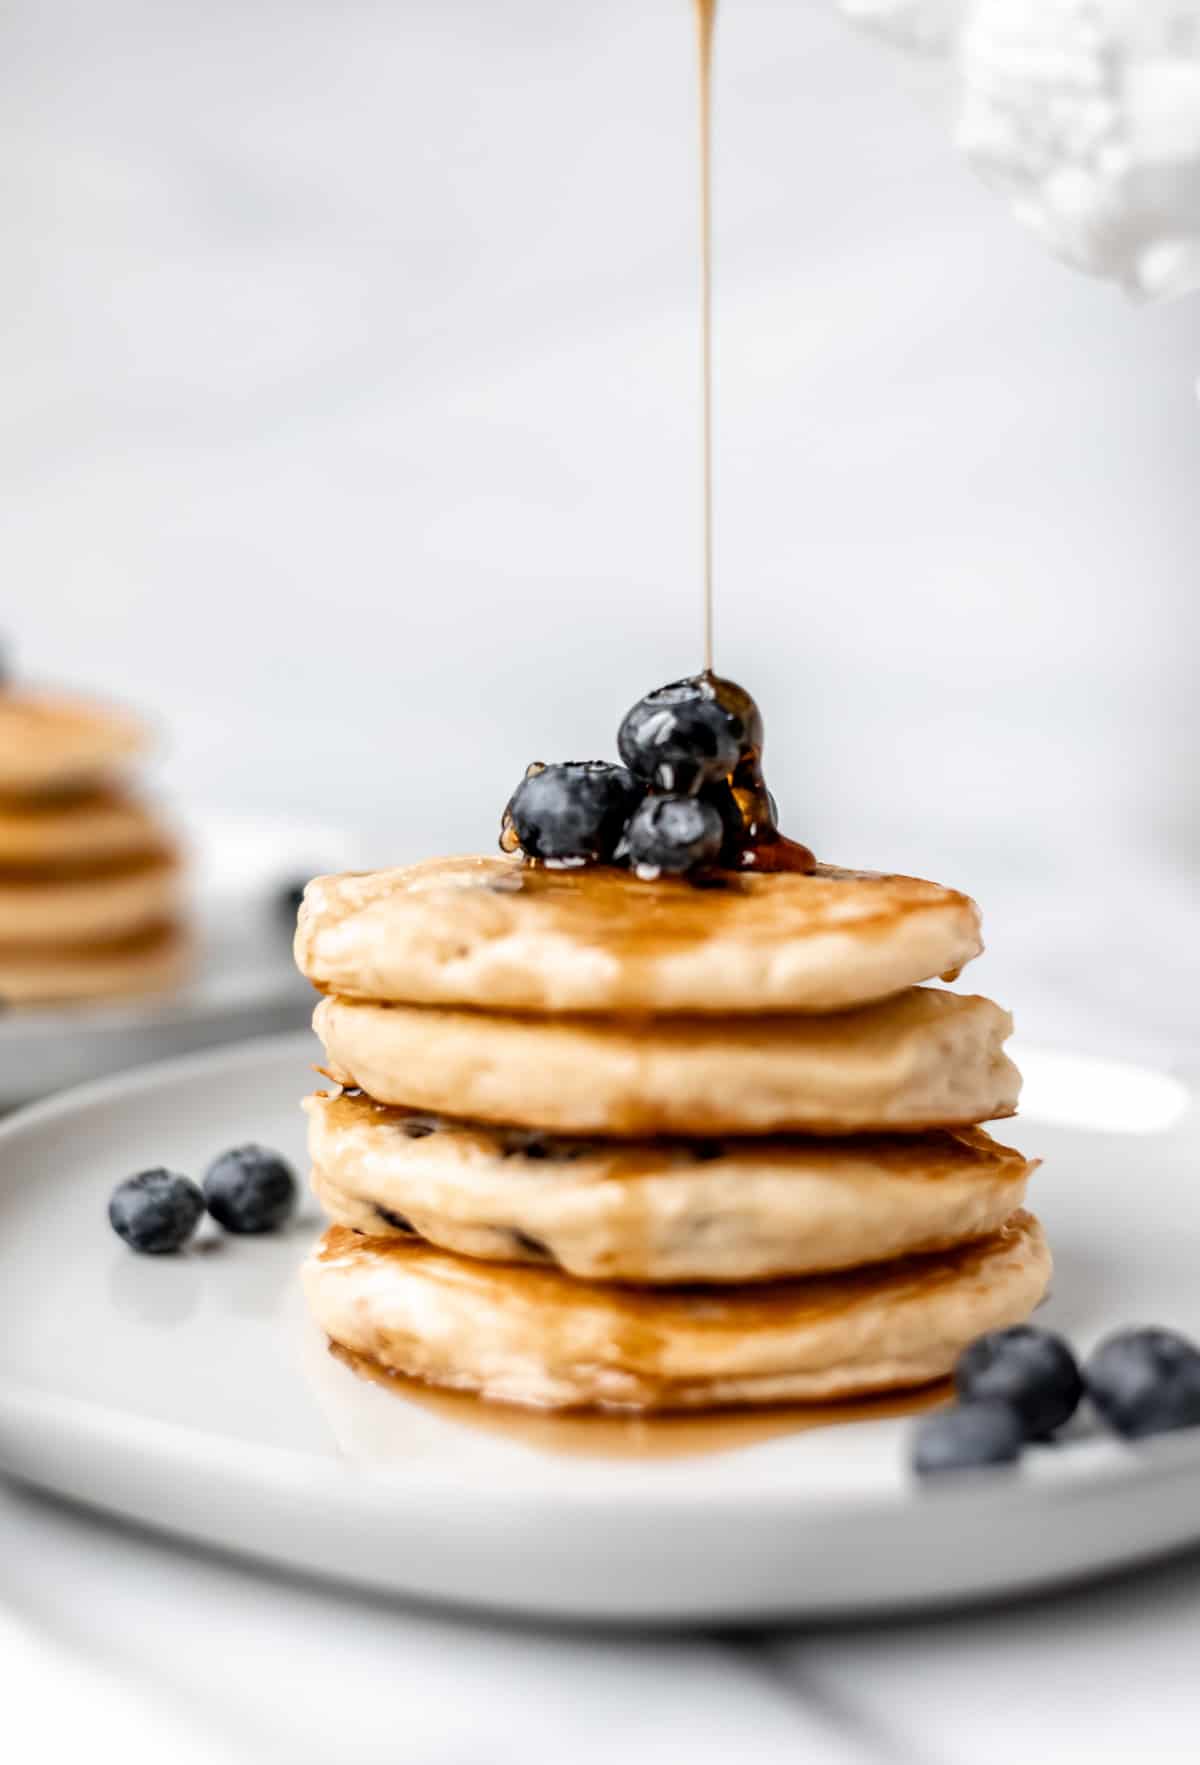 Maple syrup being poured over a stack of four fluffy blueberry pancakes on a white plate with extra blueberries and a second plate of pancakes in the background.